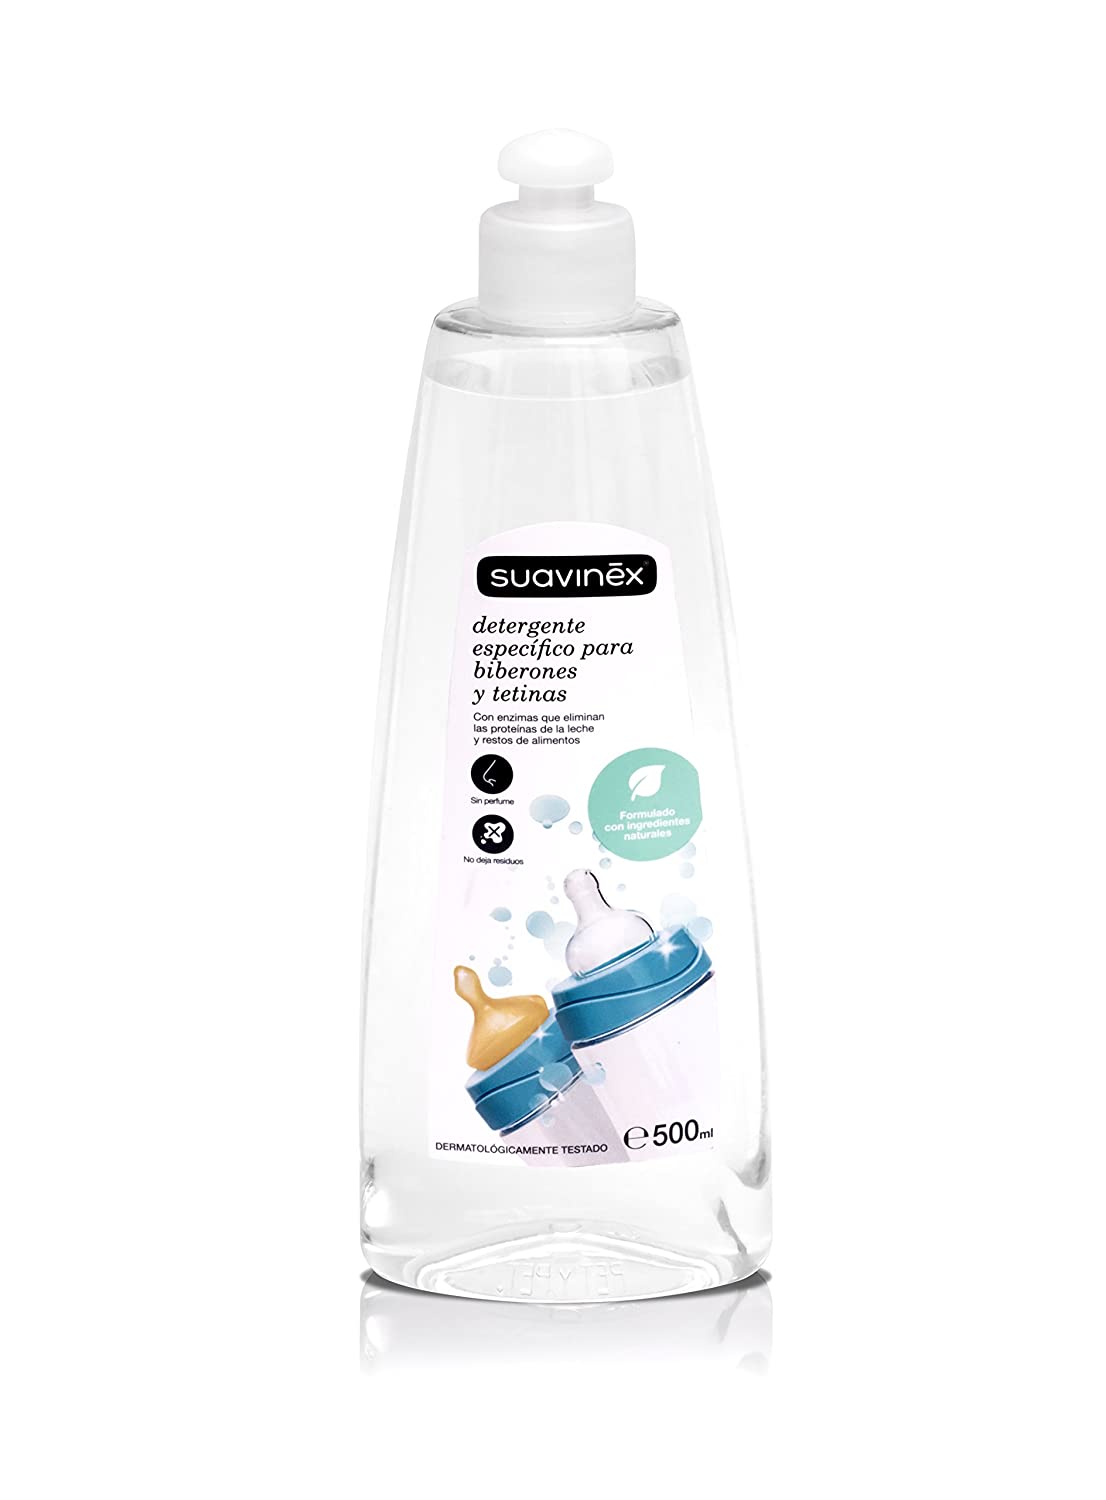 Suavinex Malta - Our popular baby cologne is now also